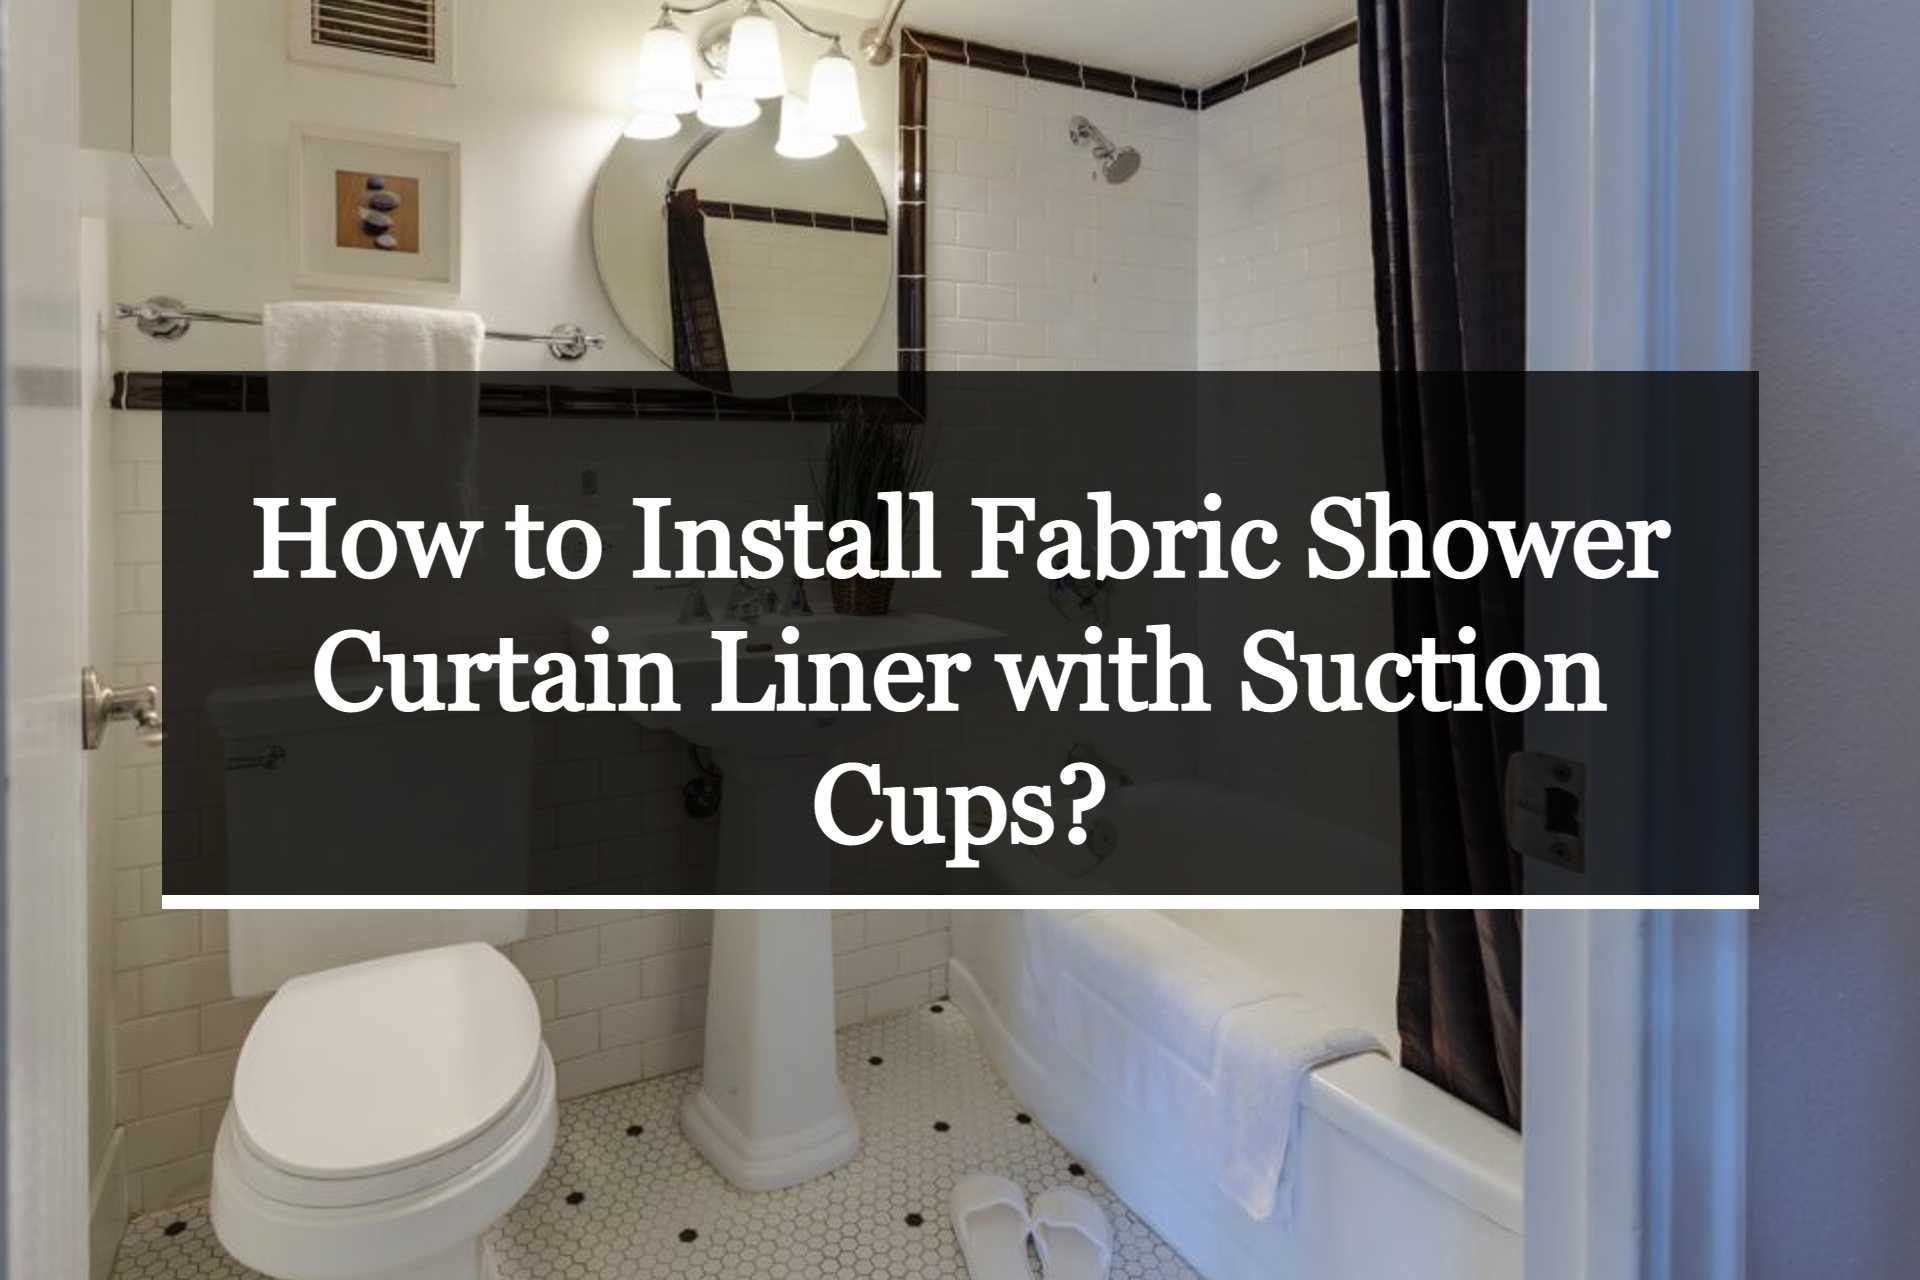 How To Install Fabric Shower Curtain Liner With Suction Cups 